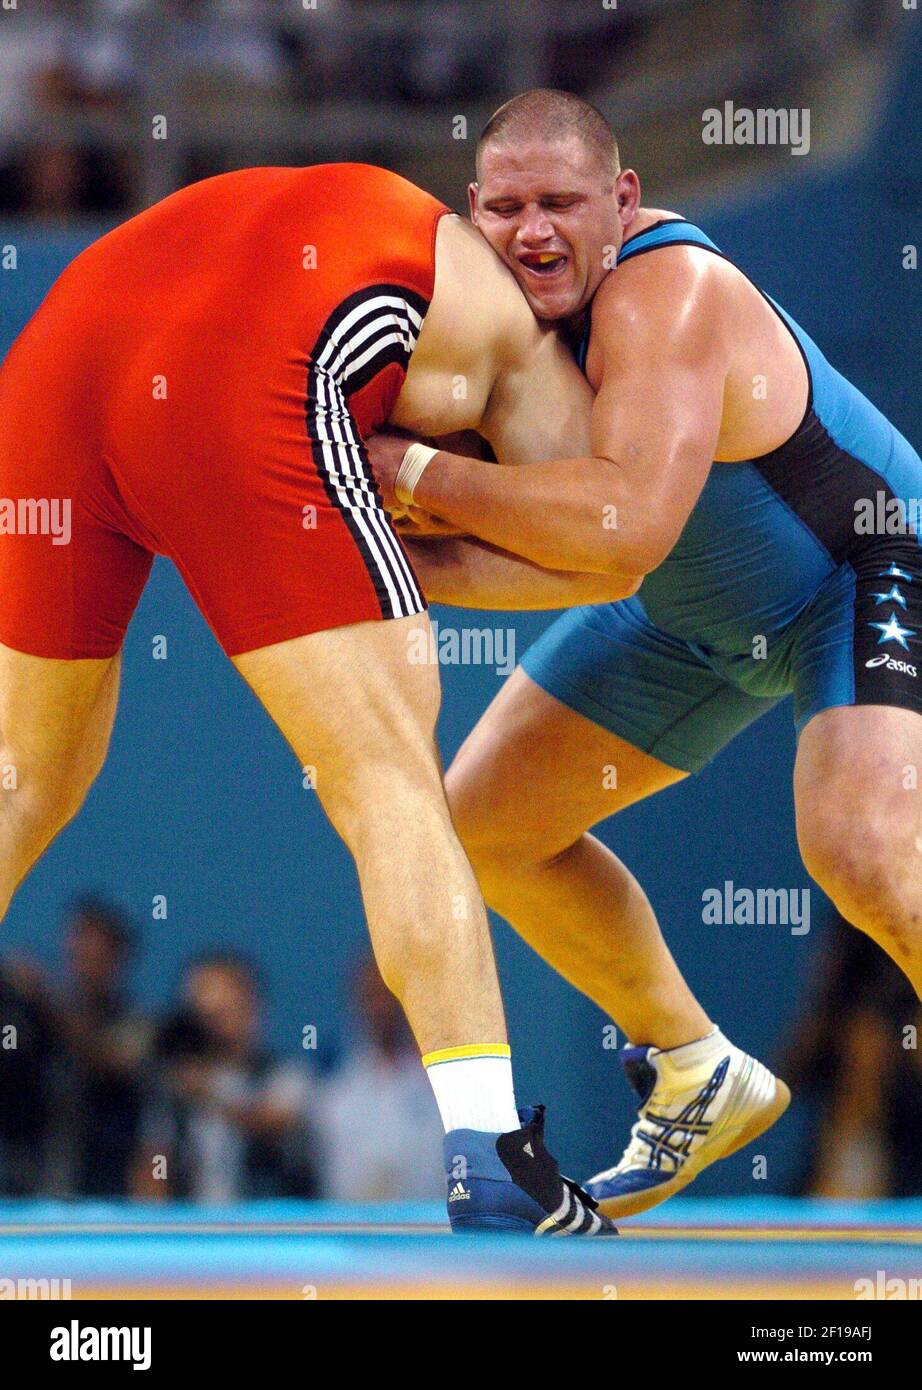 KRT SPORTS STORY SLUGGED: OLY-WRESTLING KRT PHOTO BY JOE ROSSI/ST. PAUL  PIONEER PRESS (August 25) ATHENS, GREECE -- Rulon Gardner of the United  States, right, battles Georgiy Tsurtsumia of Kazakhstan in the